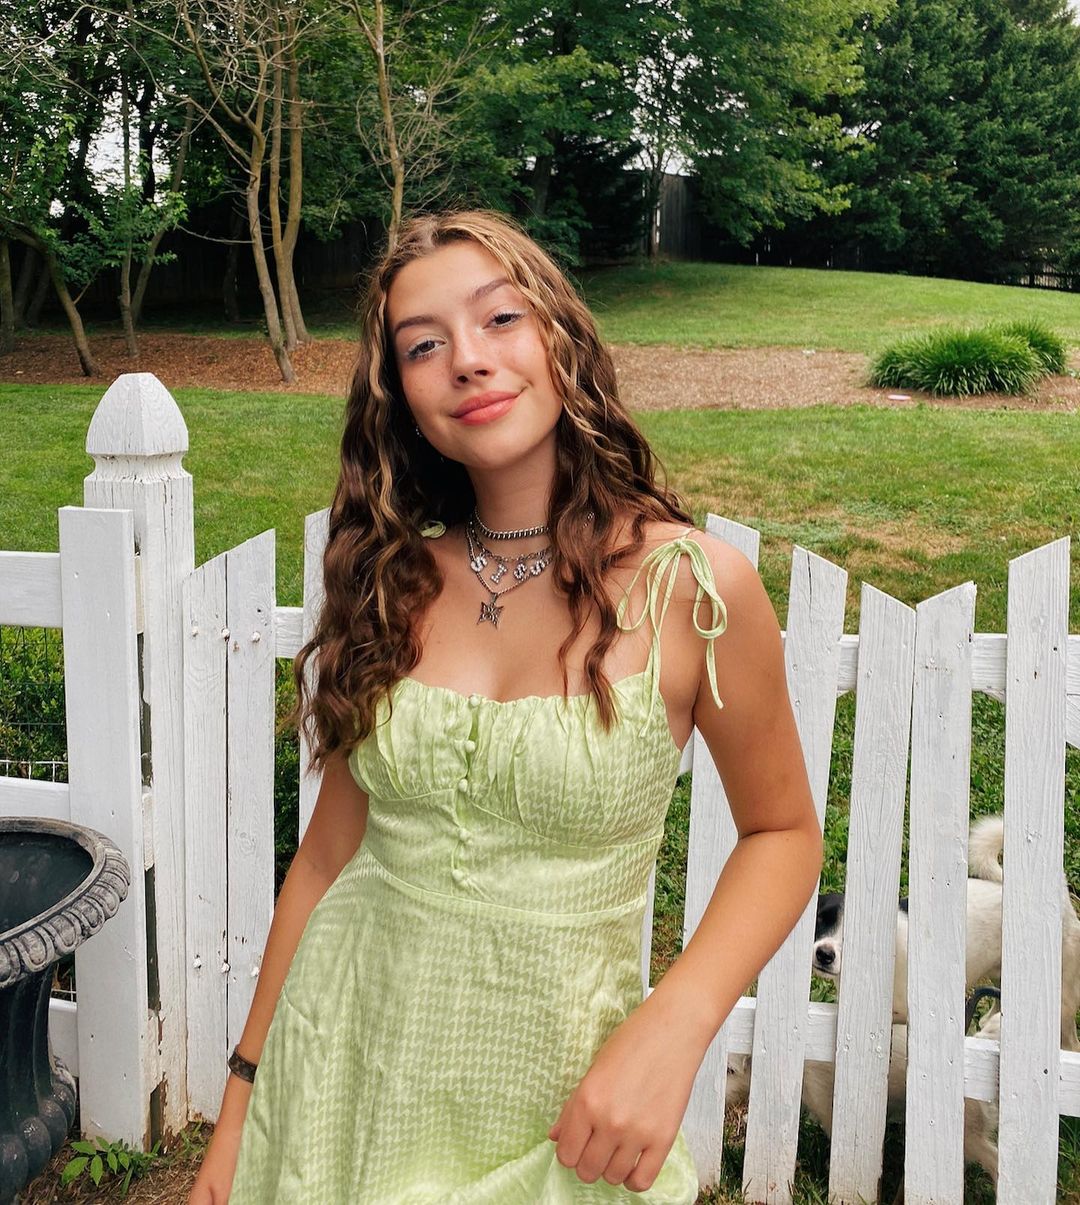 Sissy Sheridan Wiki, Biography, YouTube, Career, Success Story, Age, Net Worth, Boyfriend, Parents, Body Measurements and Social Life